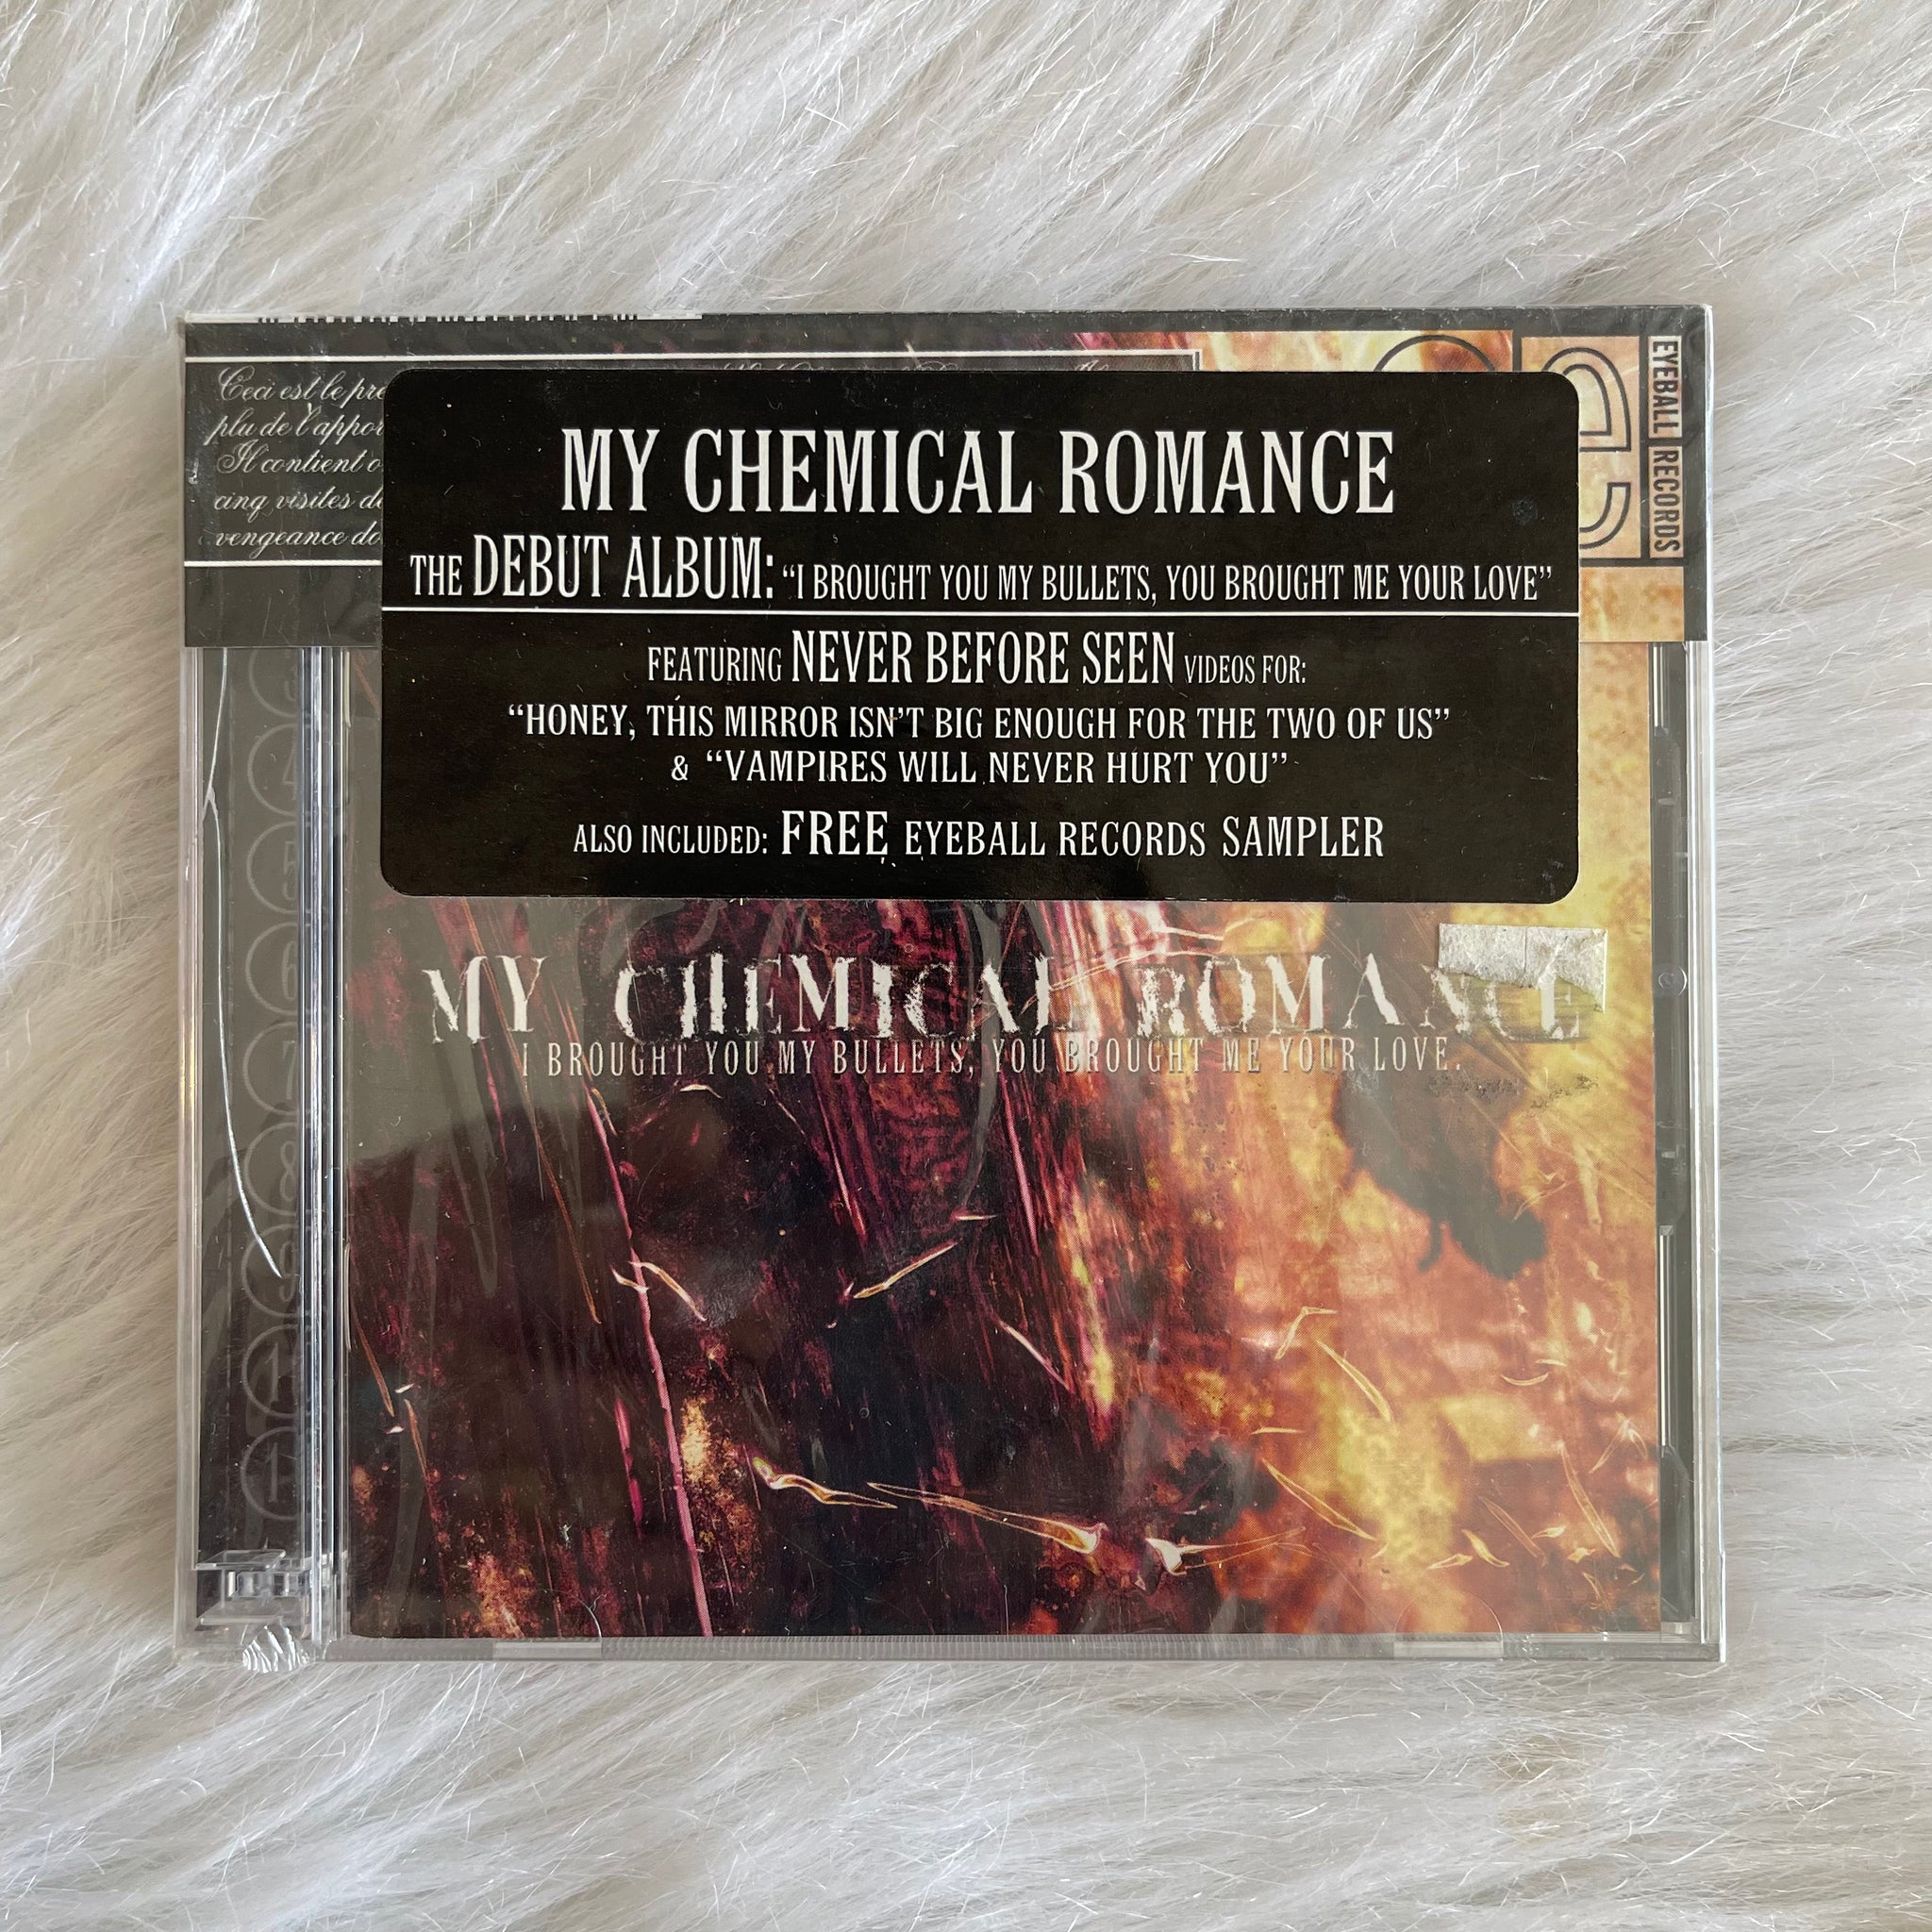 My Chemical Romance-I Brought You My Bullets, You Brought Me Your Love CD.